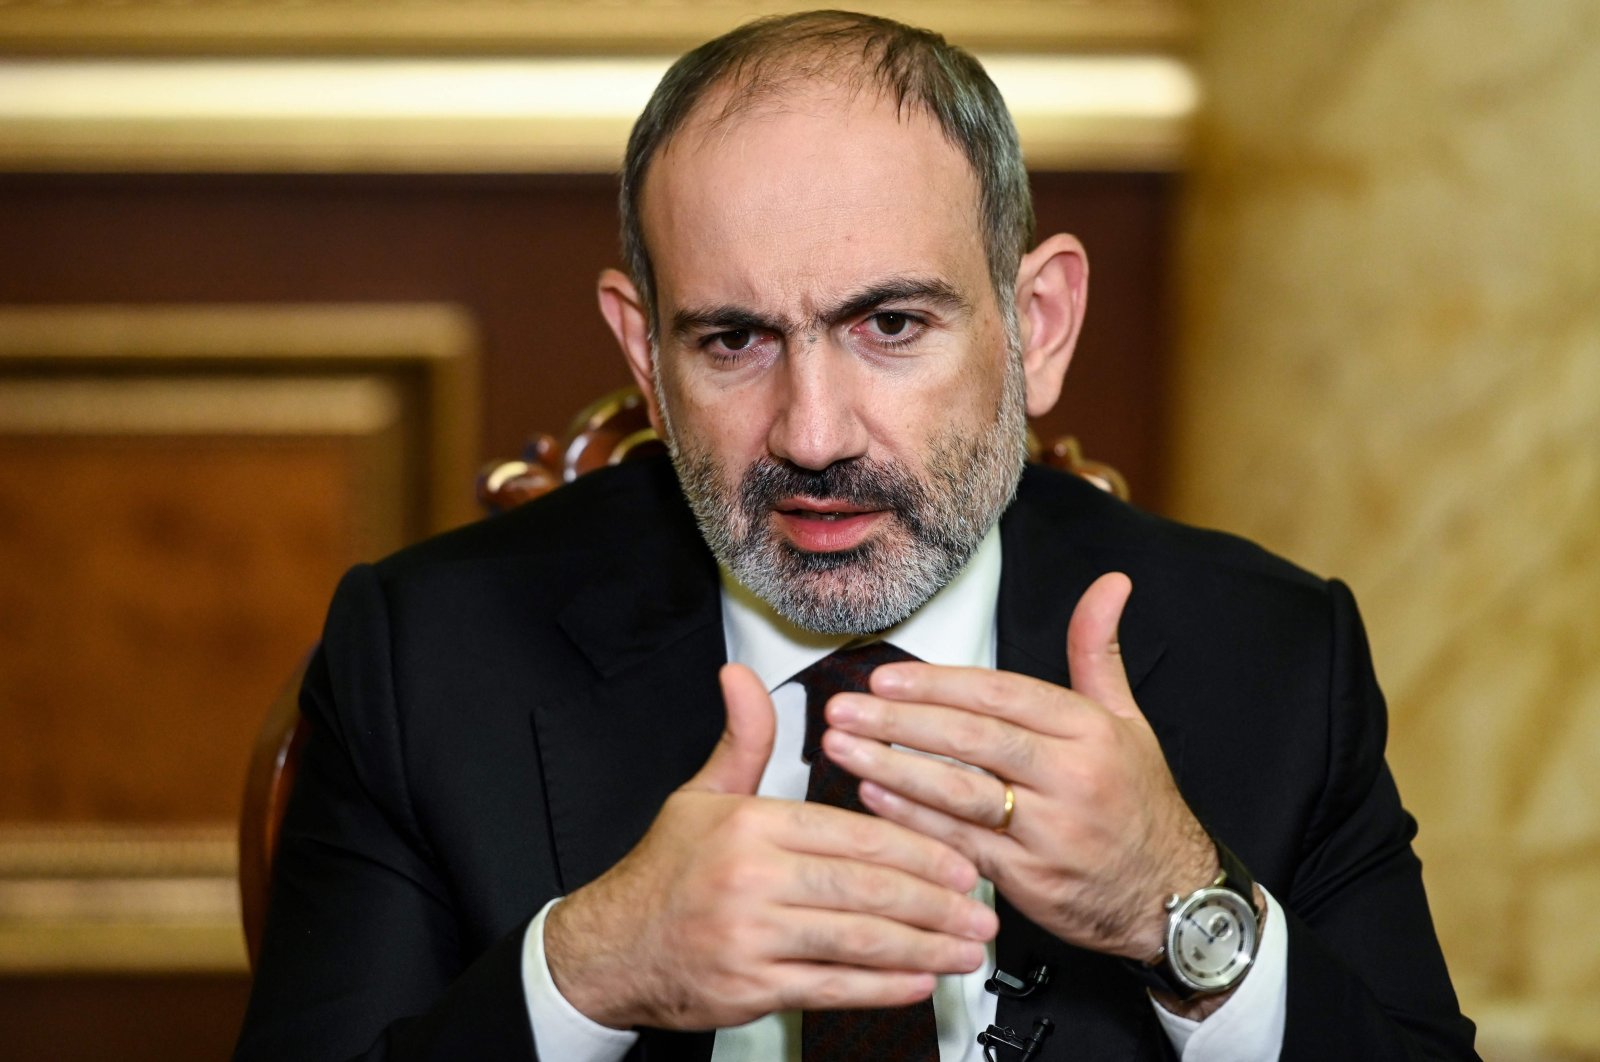 In this file photo taken on Oct. 6, 2020, Armenian Prime Minister Nikol Pashinian gives an interview to AFP in Yerevan, Armenia. (AFP Photo)